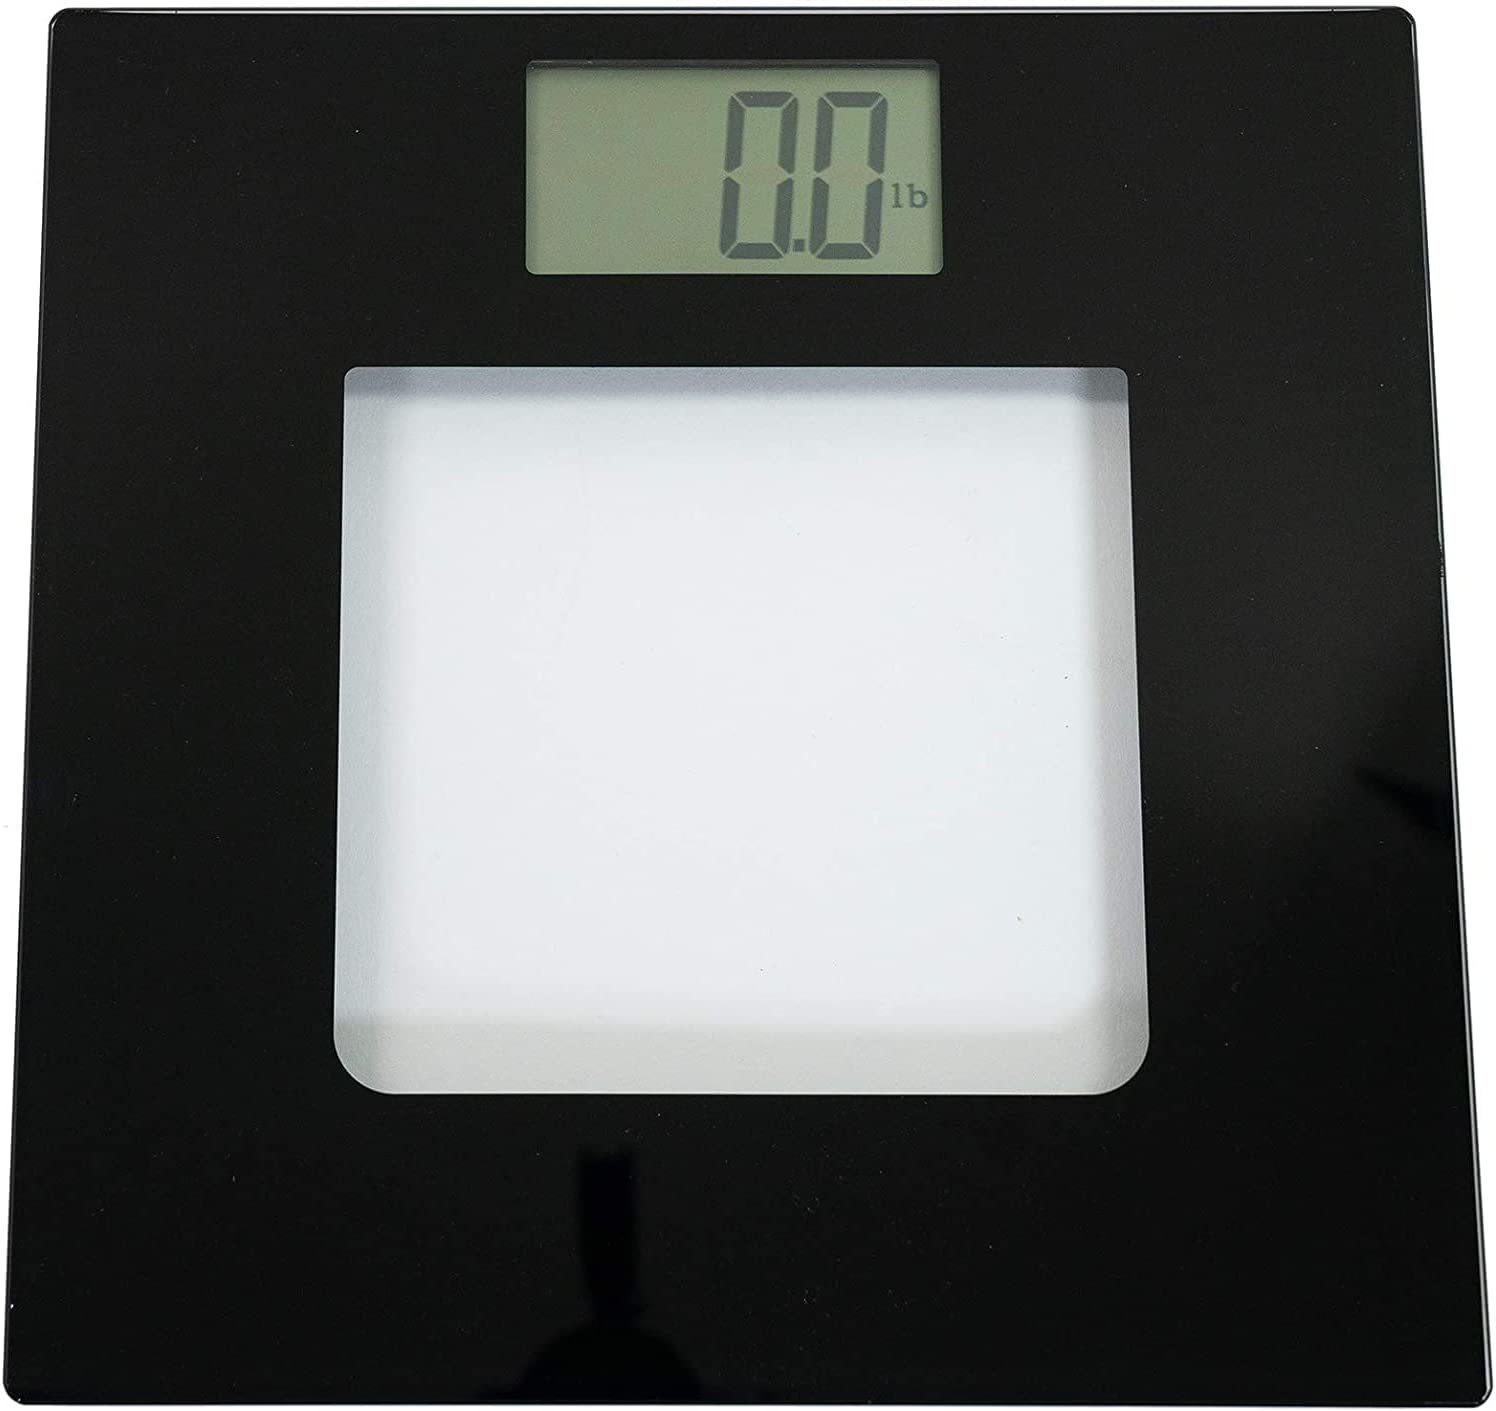 Primary image for Large Lcd Display-Tap Auto On Extra Wide Glass Talking Digital, 395 Pounds Max